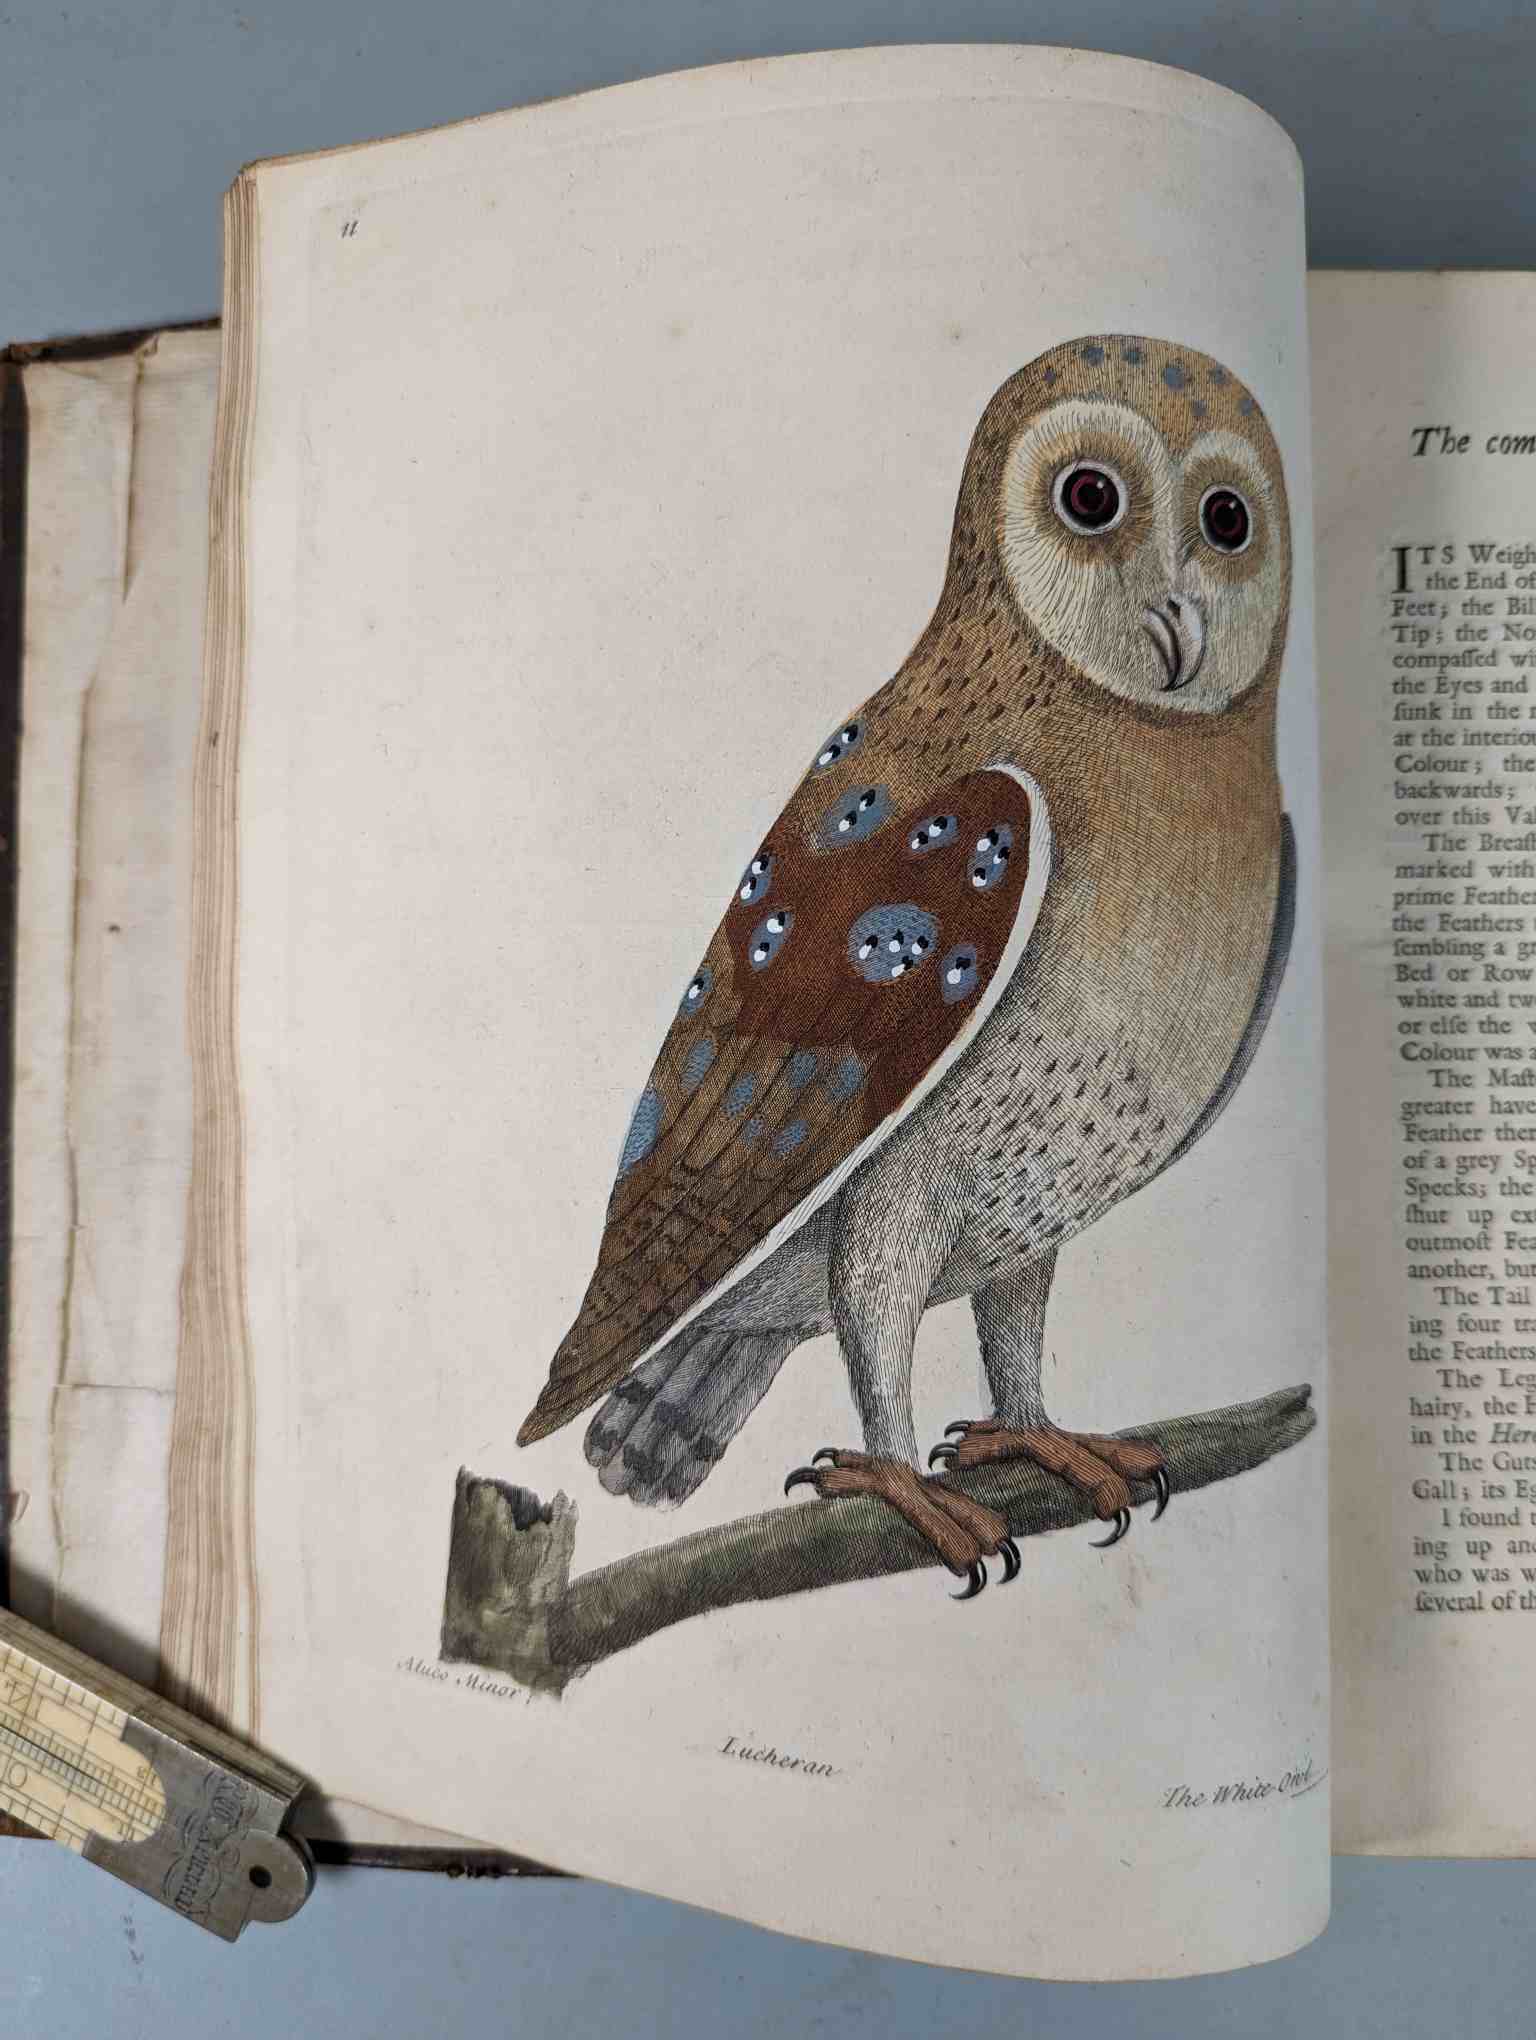 ALBIN, Eleazar. A Natural History of Birds, to which are added, Notes and Observations by W. - Image 115 of 208